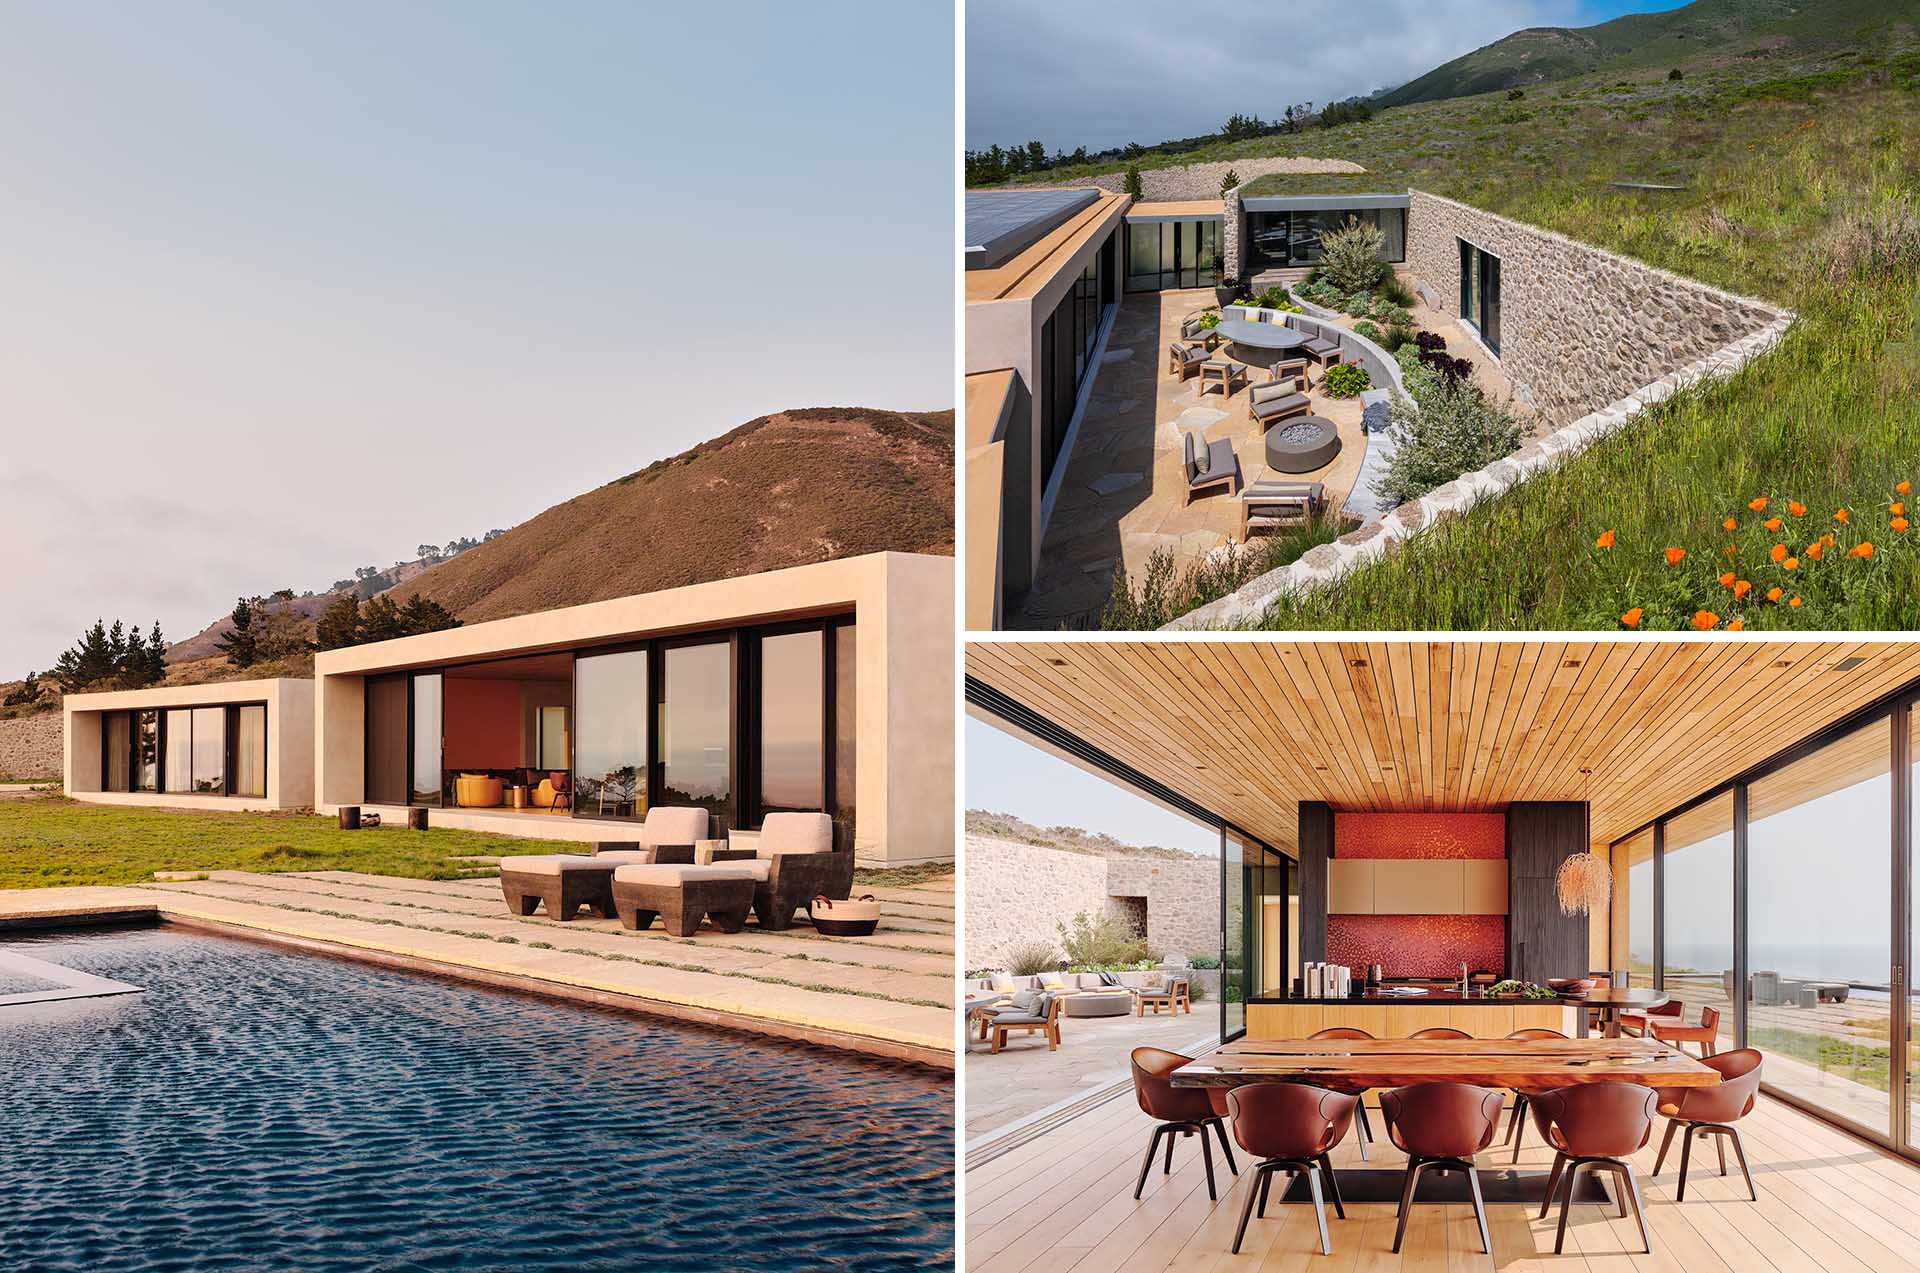 This modern home blends into the hill and has an exterior of stone walls made, from local granite, and concrete that's been finished in earth tone colors.